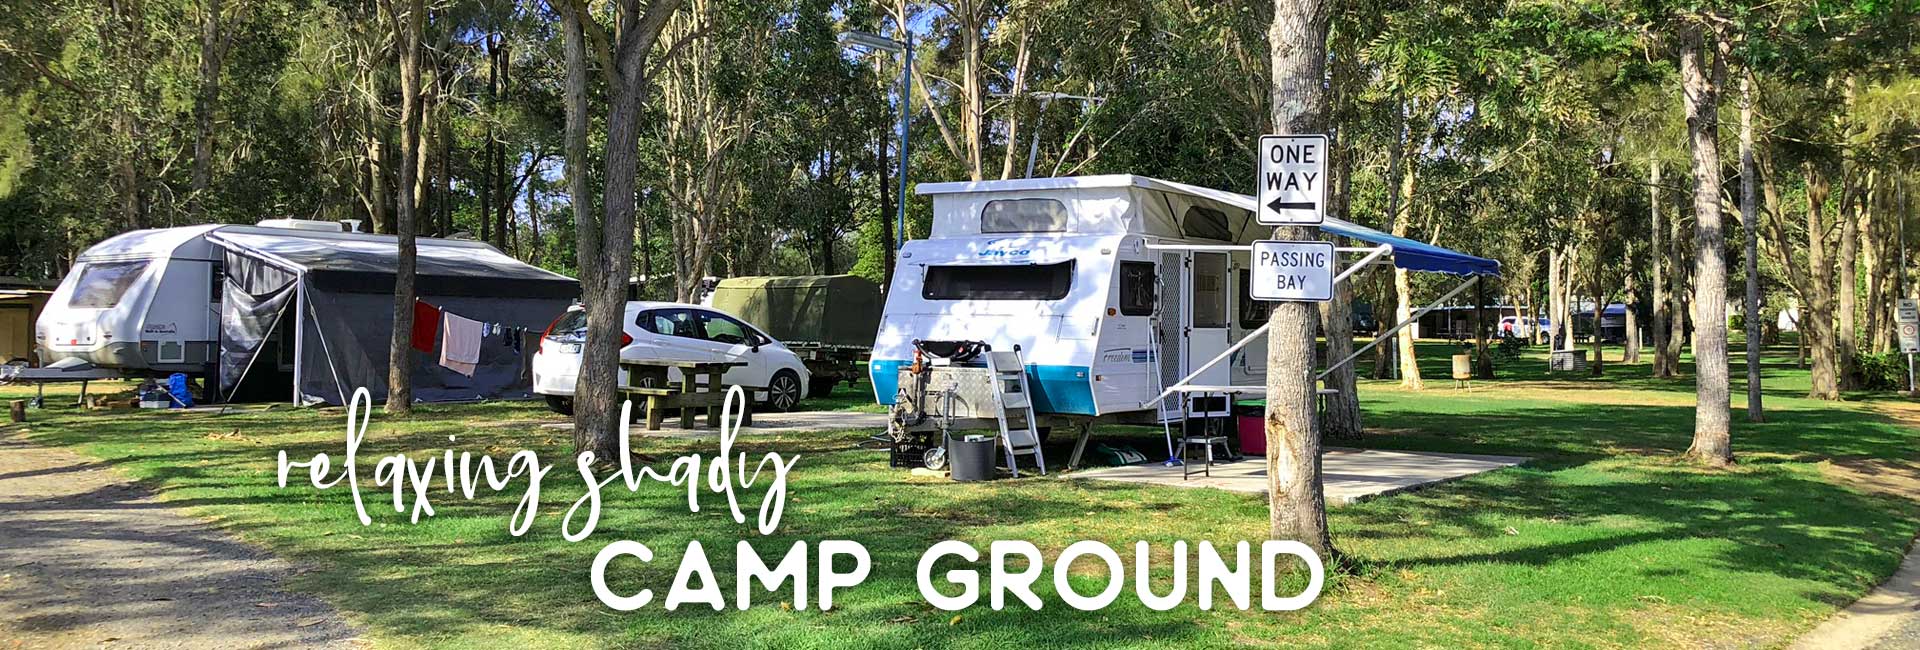 camp grounds at weeroona